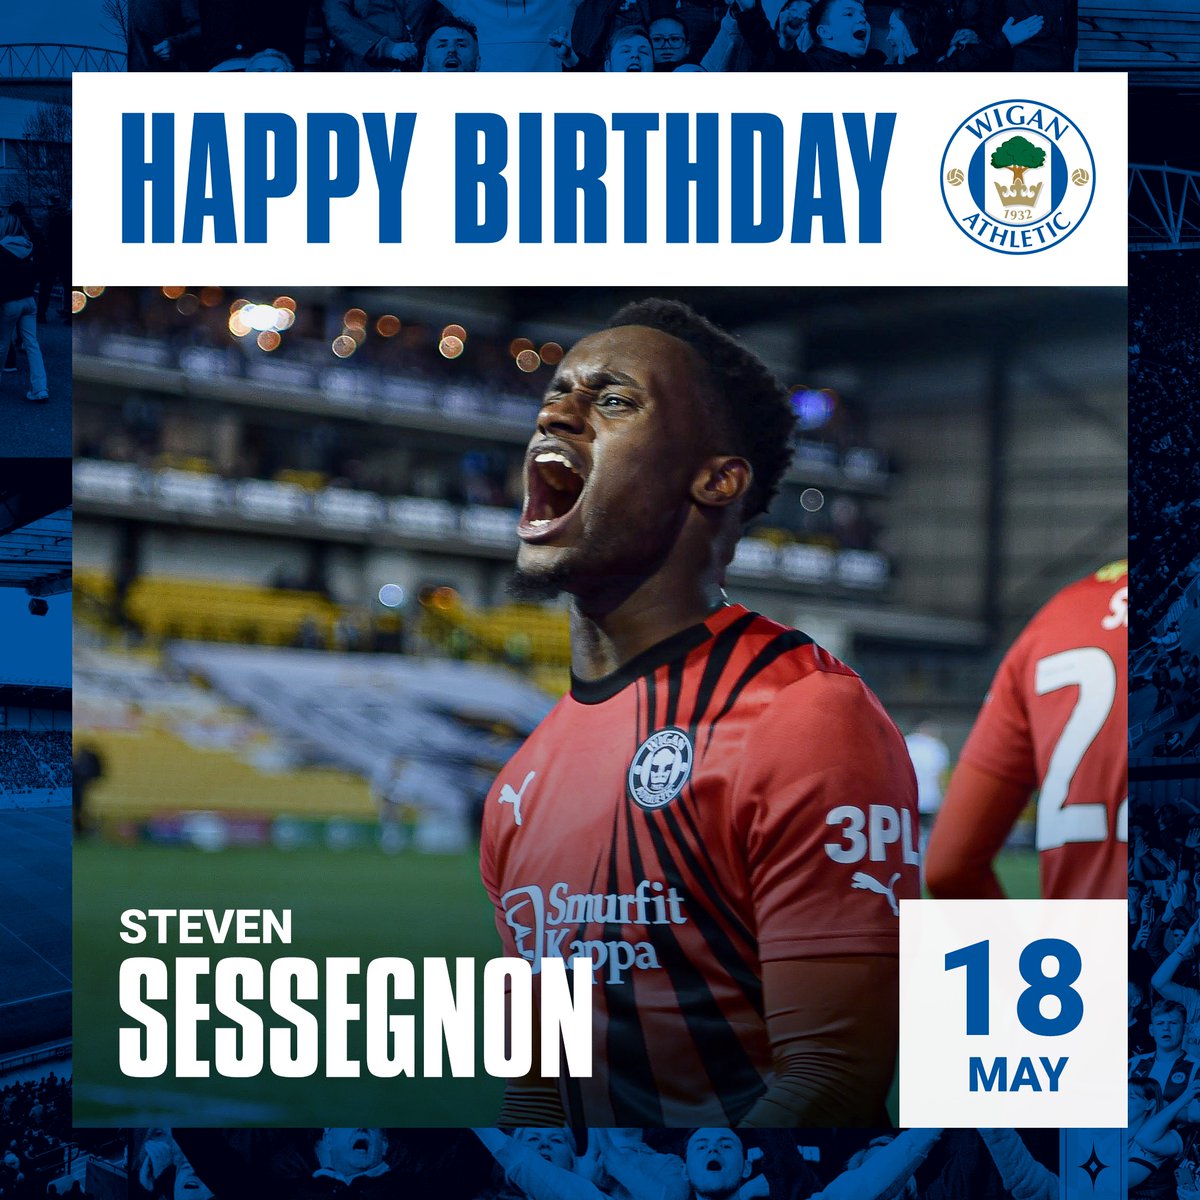 🎂🎉 Wishing a Happy Birthday to defender, Steven Sessegnon! Have a great day, Sess! 🙌 #wafc 🔵⚪️